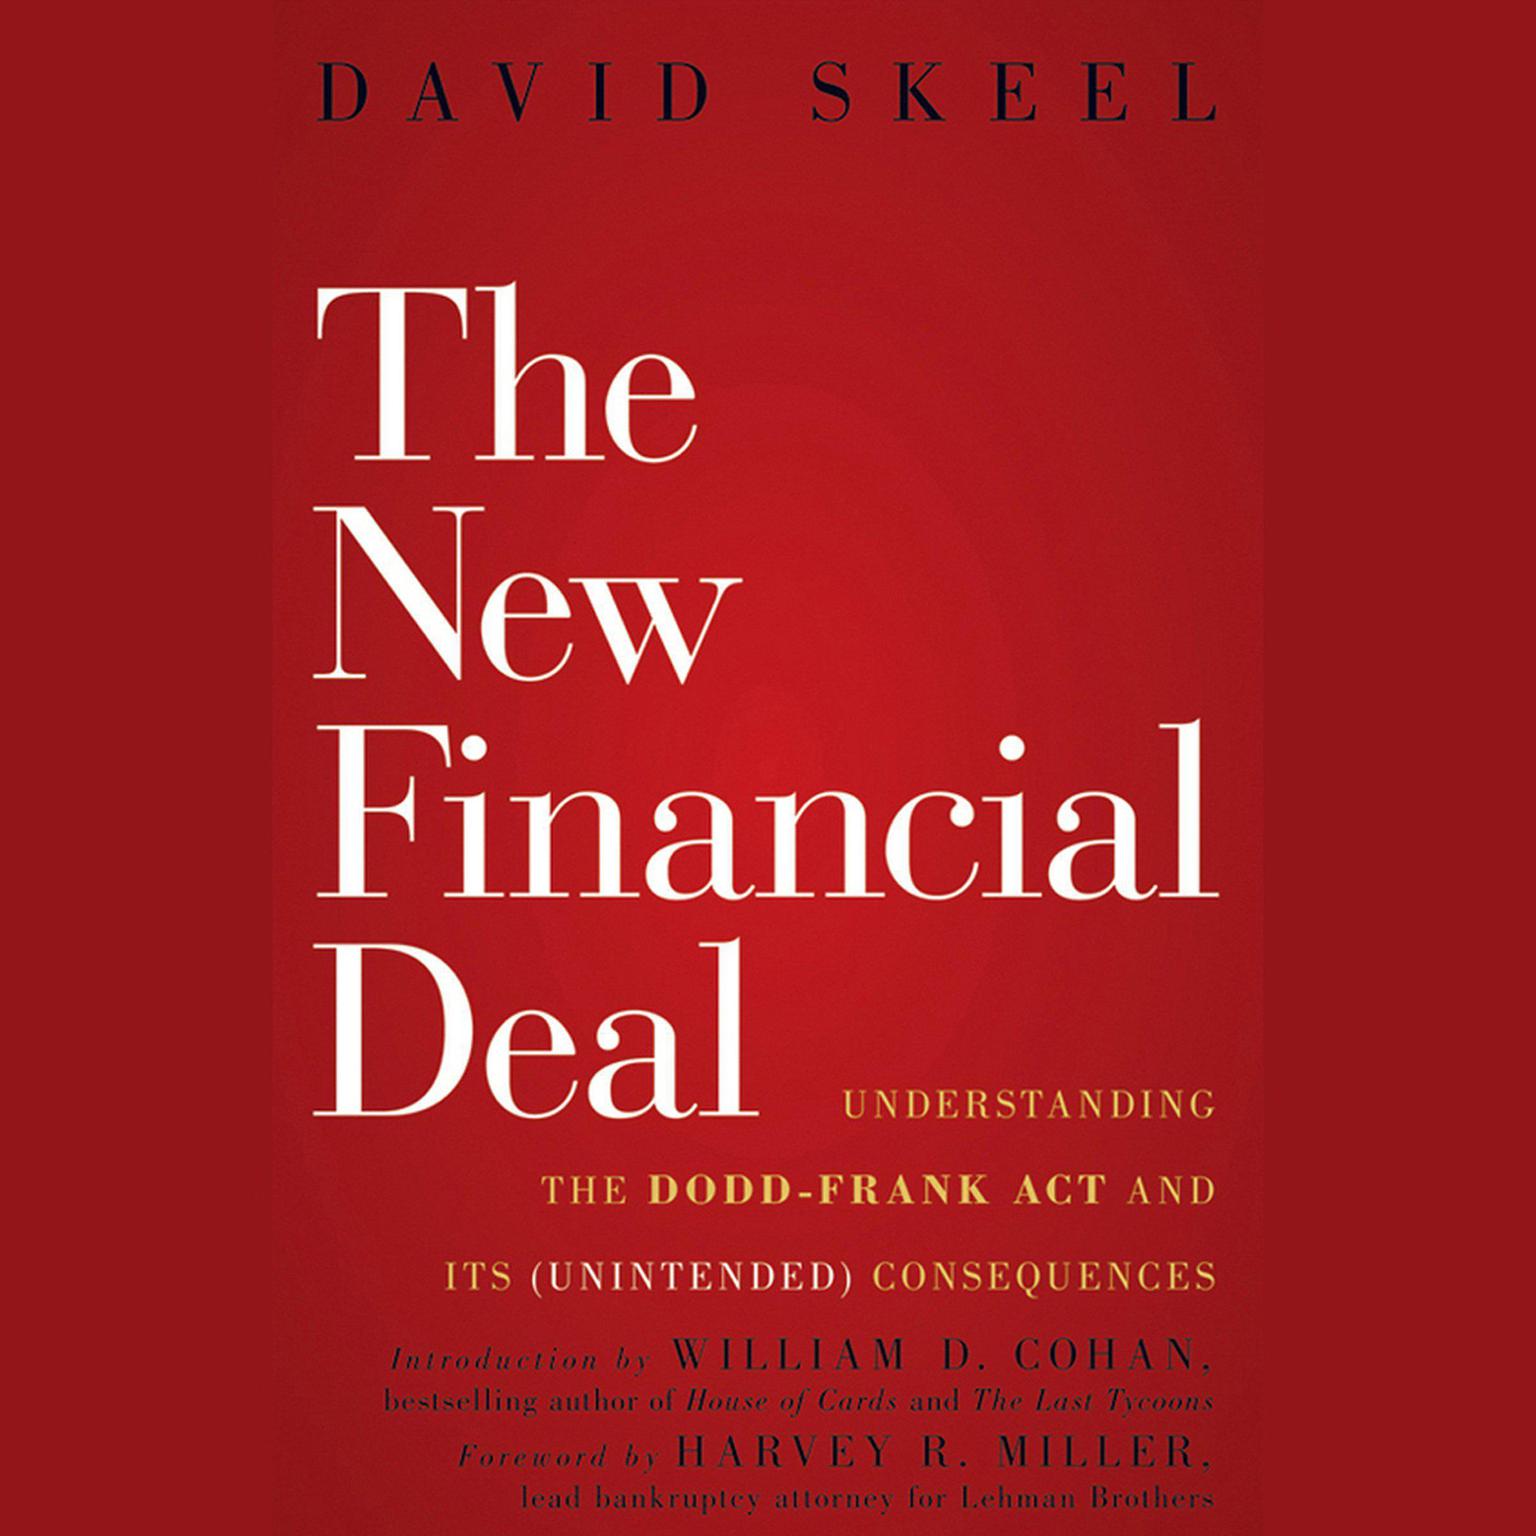 The New Financial Deal: Understanding the Dodd-Frank Act and Its (Unintended) Consequences Audiobook, by David Skeel